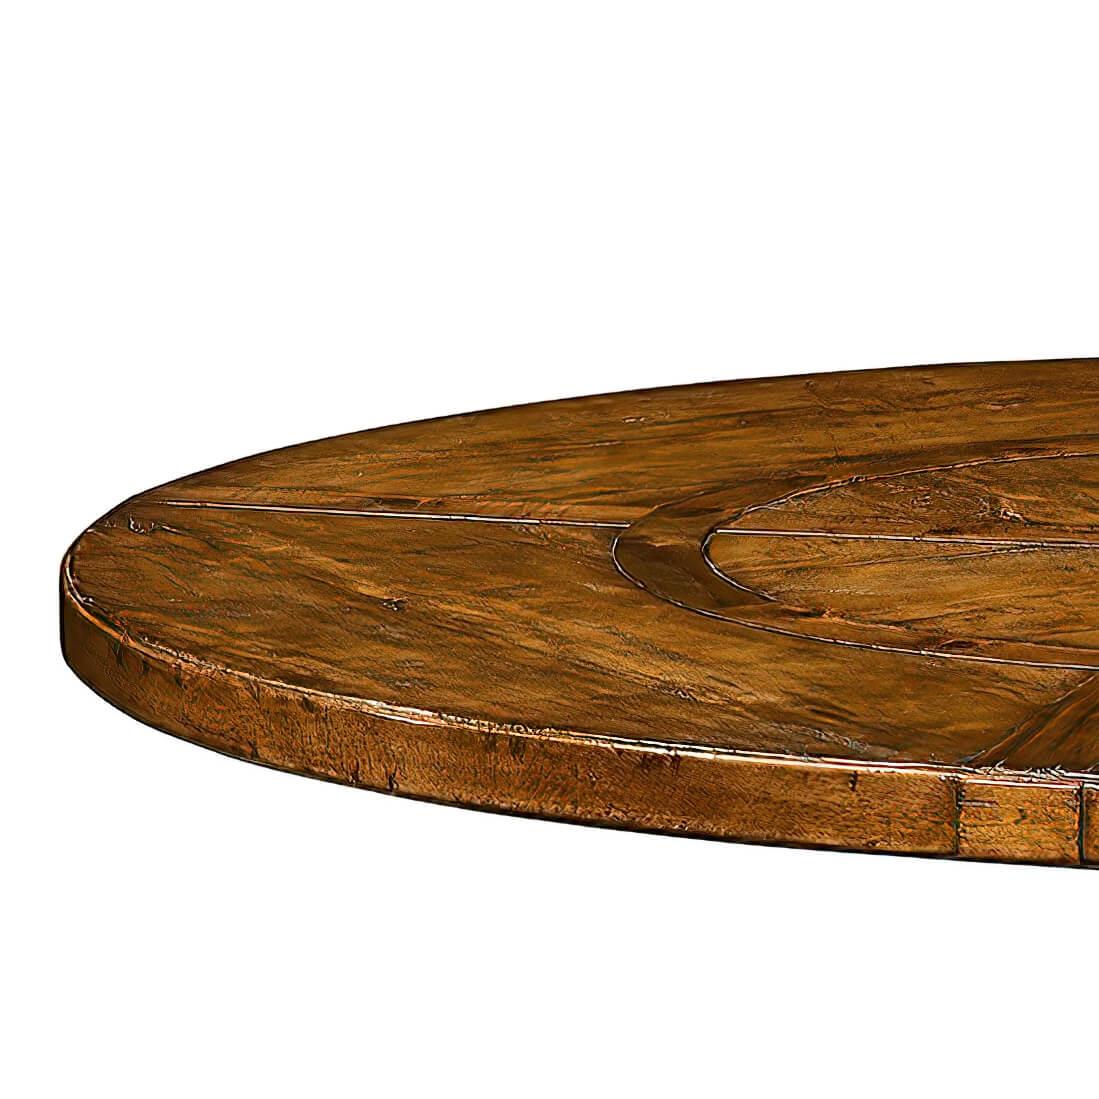 A large round dining table finished in our dark ale color with a rustic finish showing exposed saw marks and set on a bracketed country kitchen base, the table also has a built-in self-storing lazy Susan.

Dimensions: 72